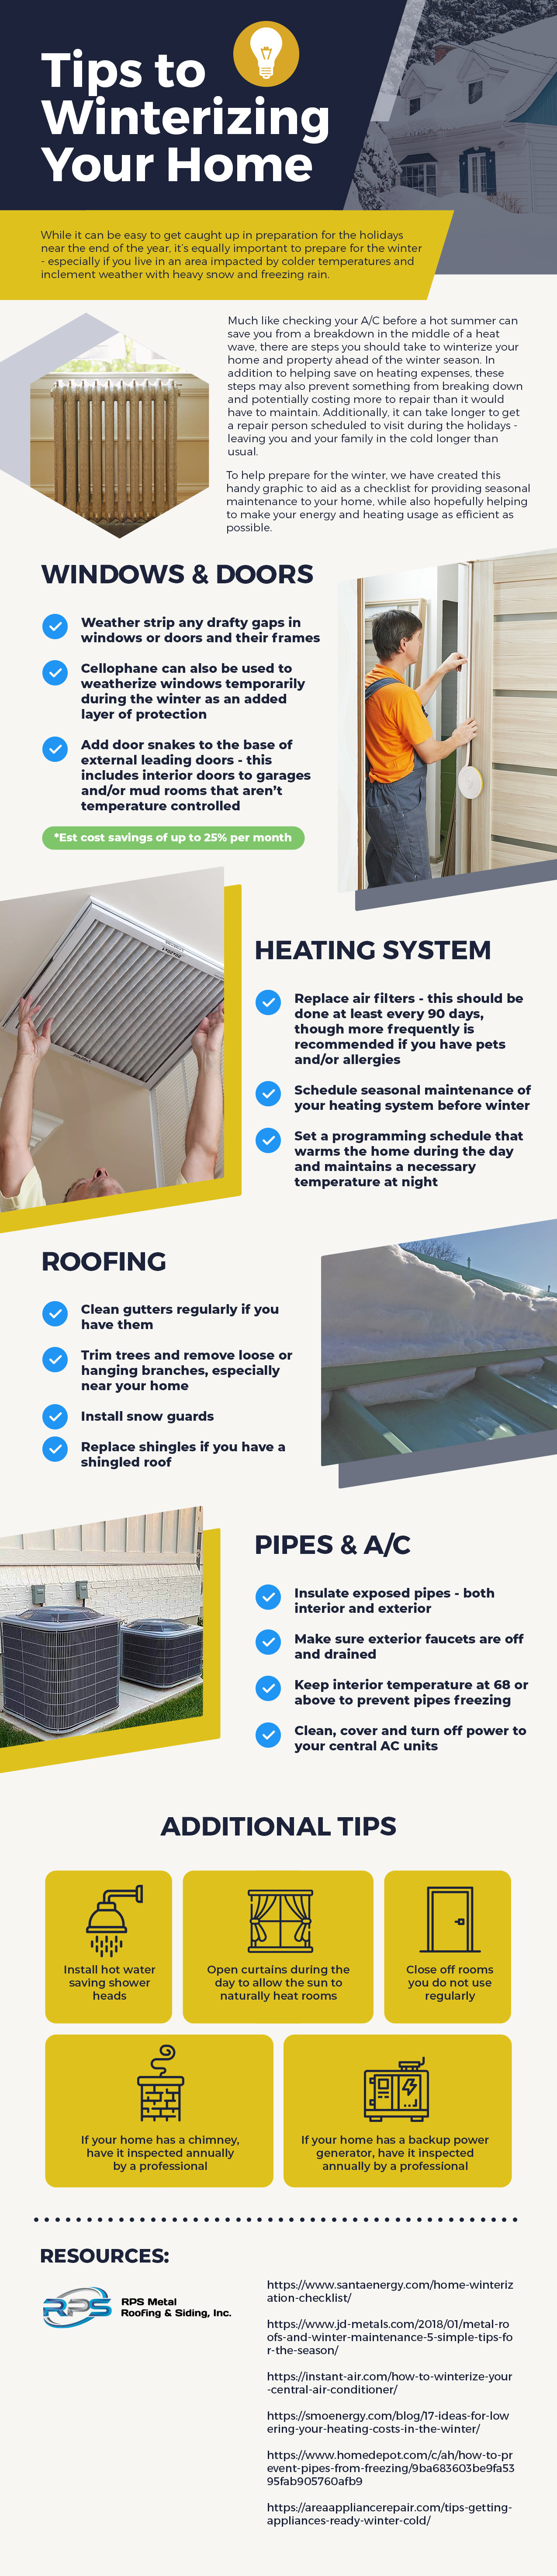 tips to winterizing your home infographic